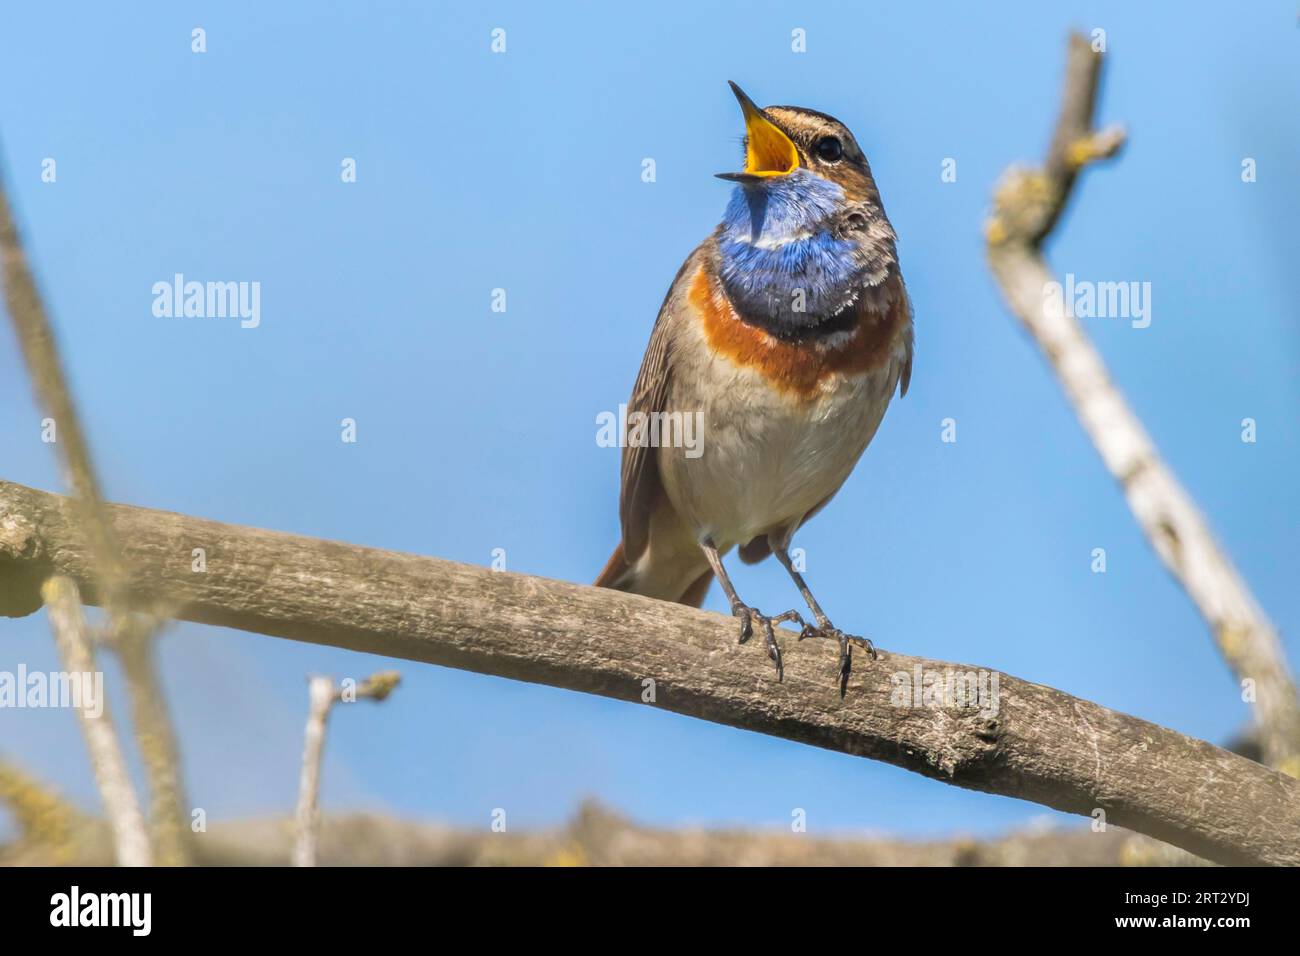 A white-spotted bluethroat on a branch, A white-spotted bluethroat on a branch Stock Photo